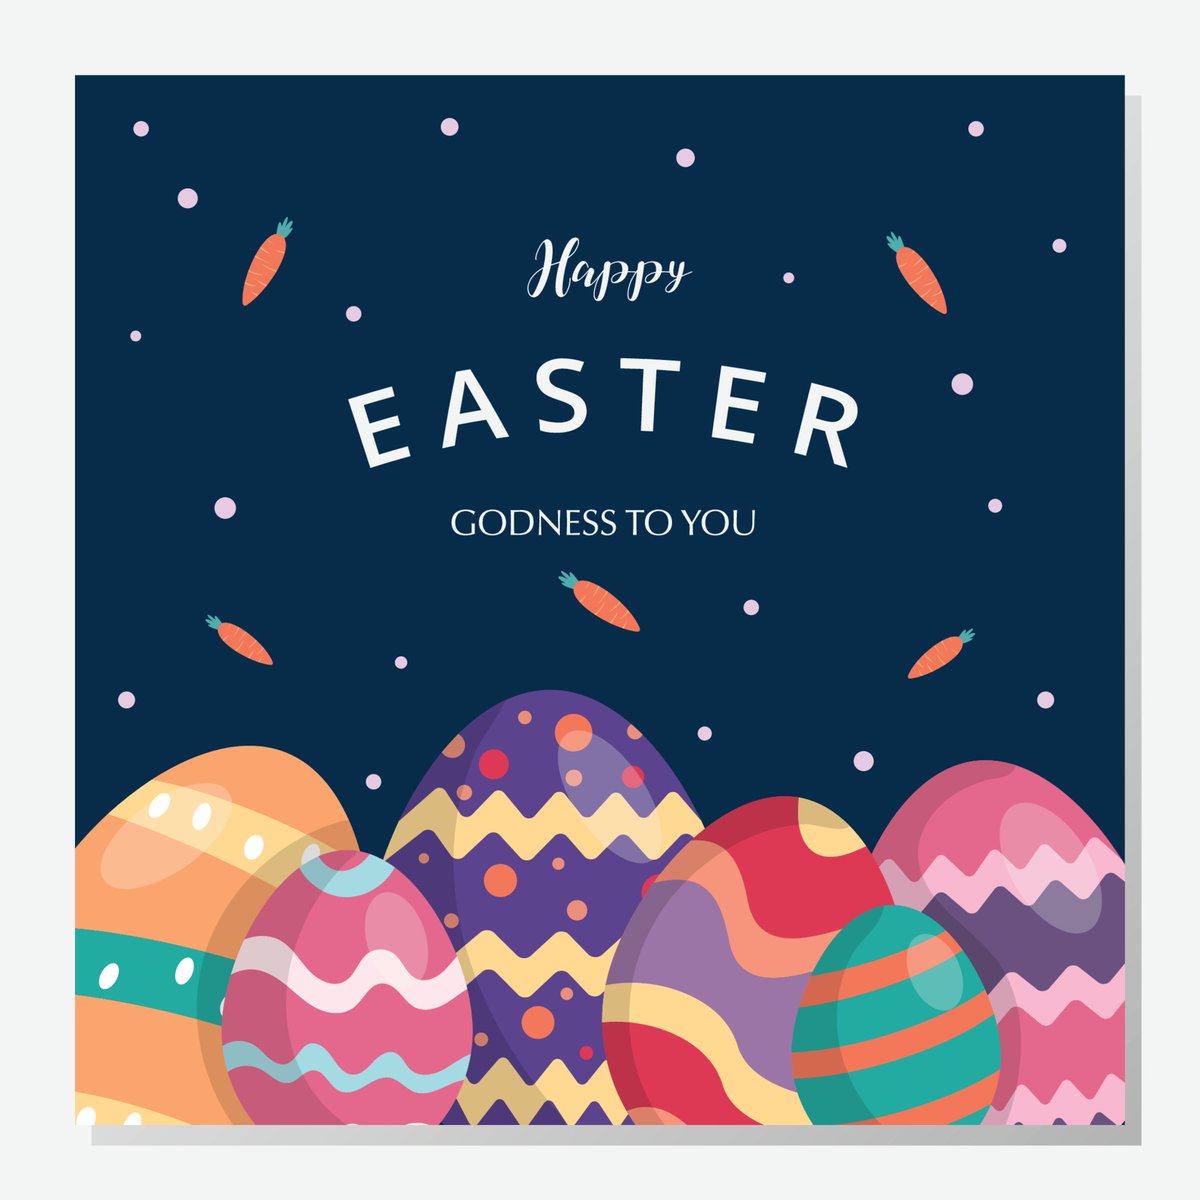 Happy Easter to you all, from the Primary Care Careers team.